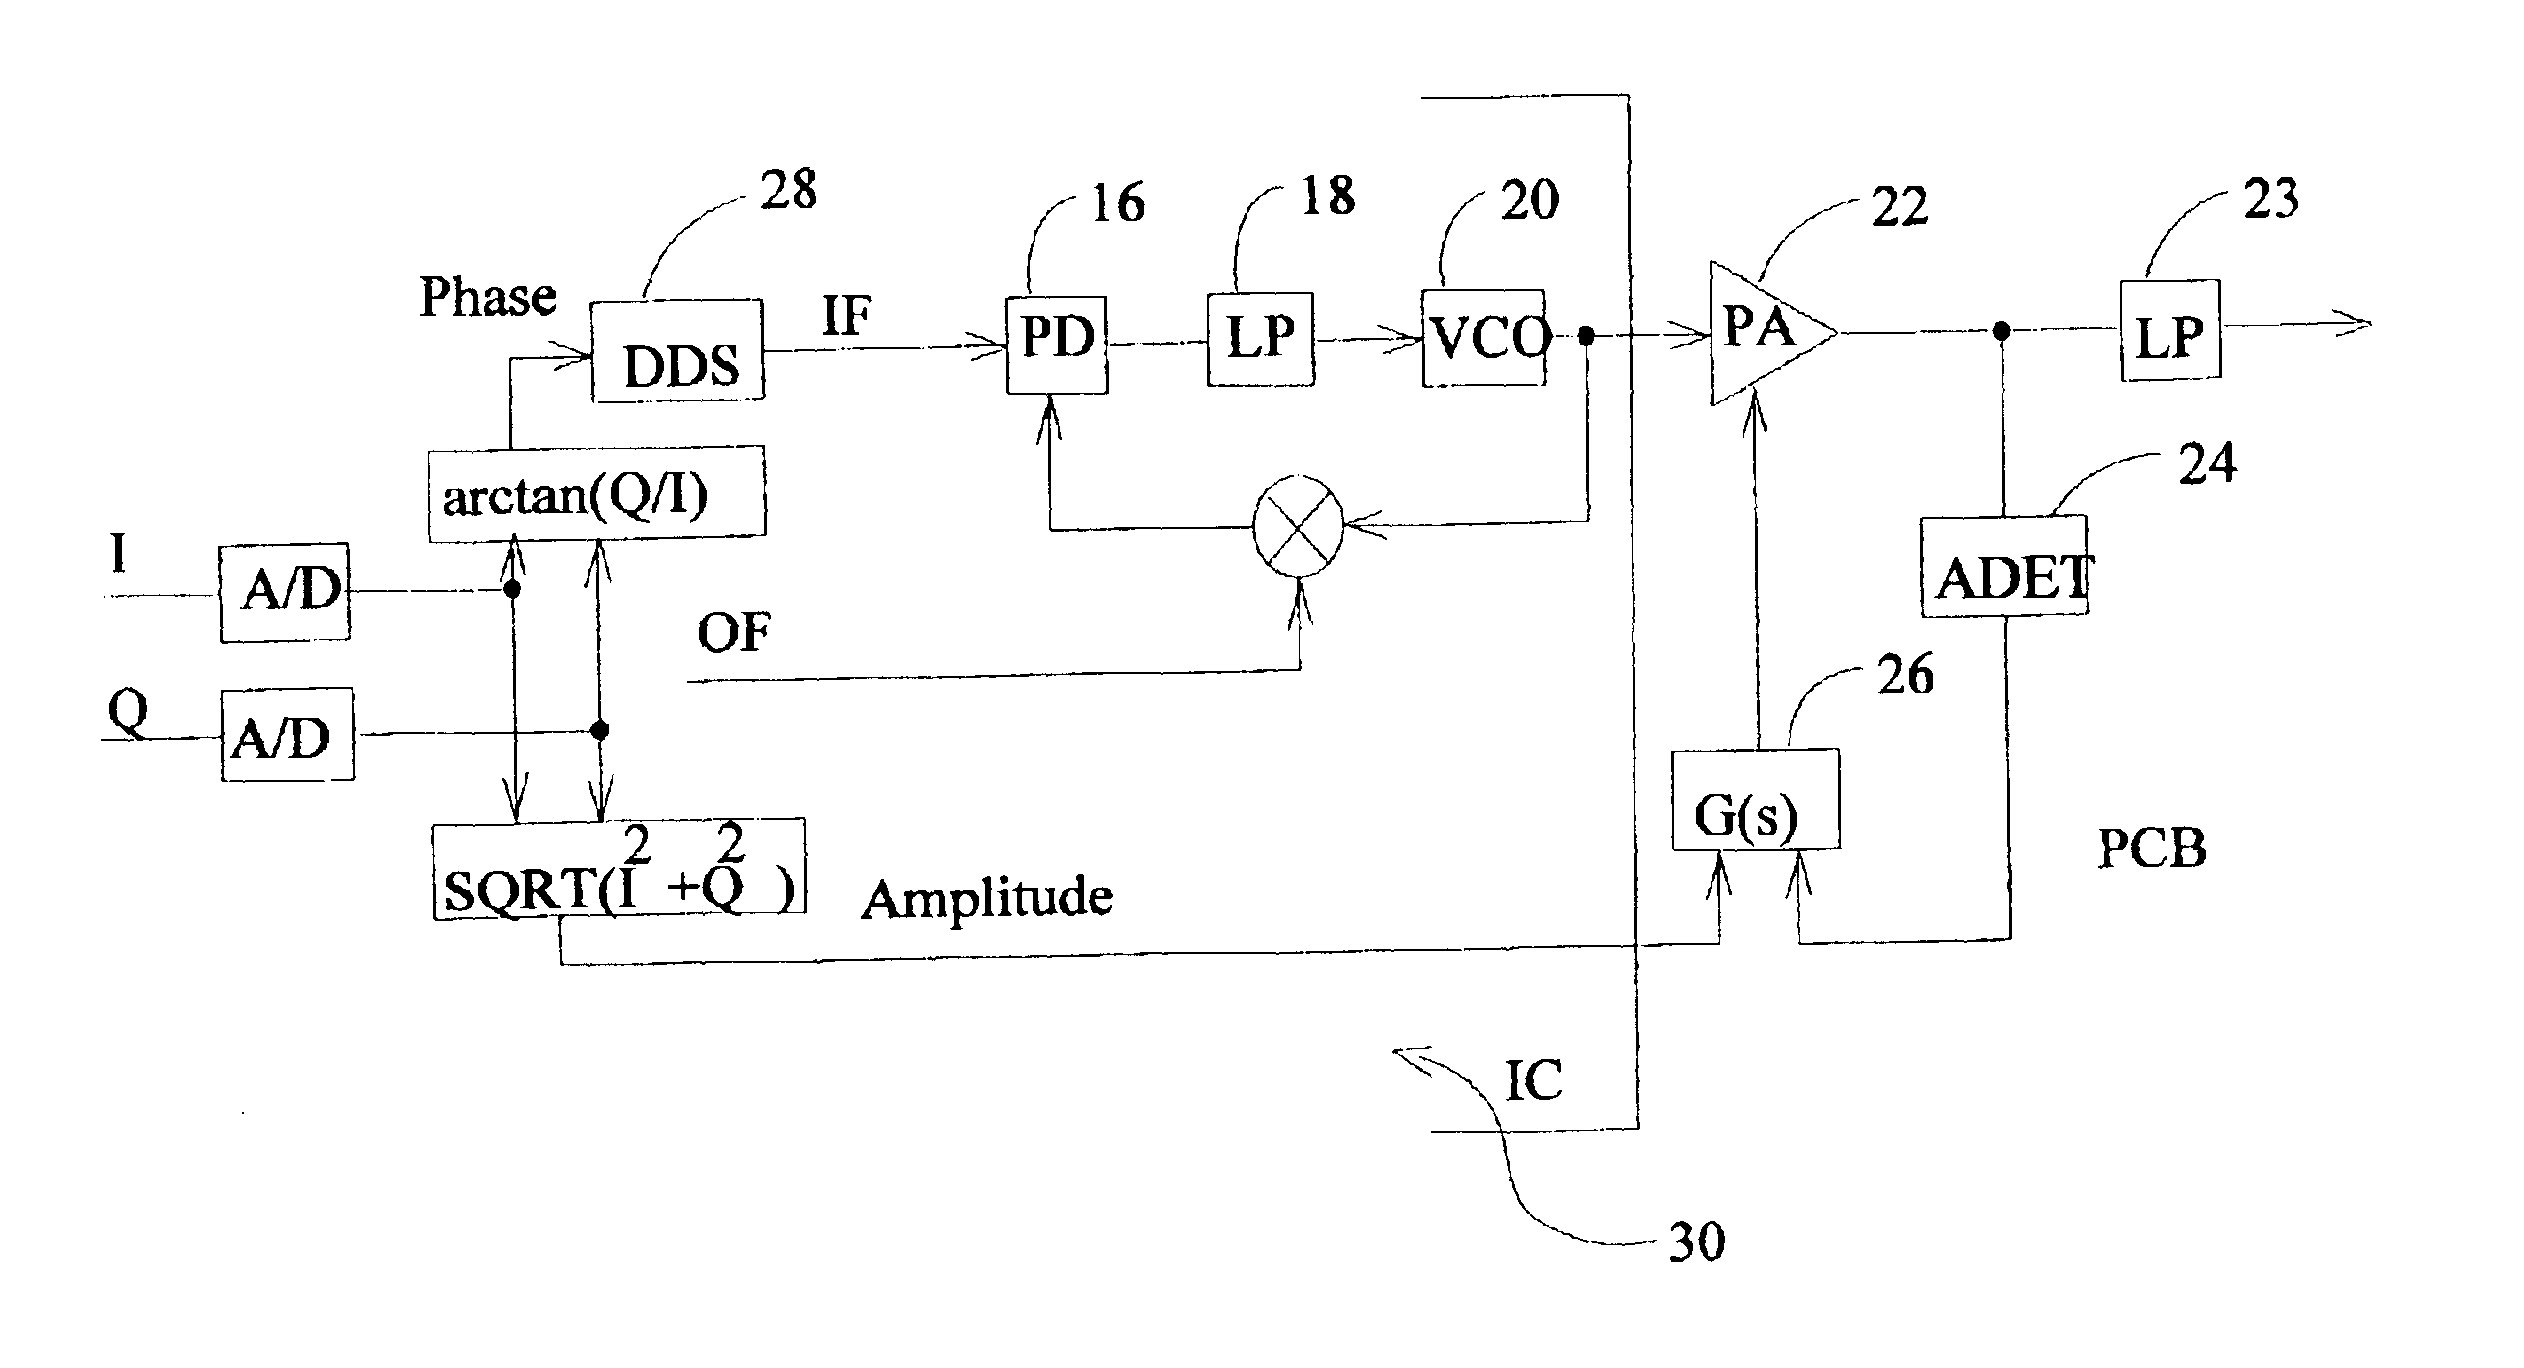 Multimode modulator employing a phase lock loop for wireless communications